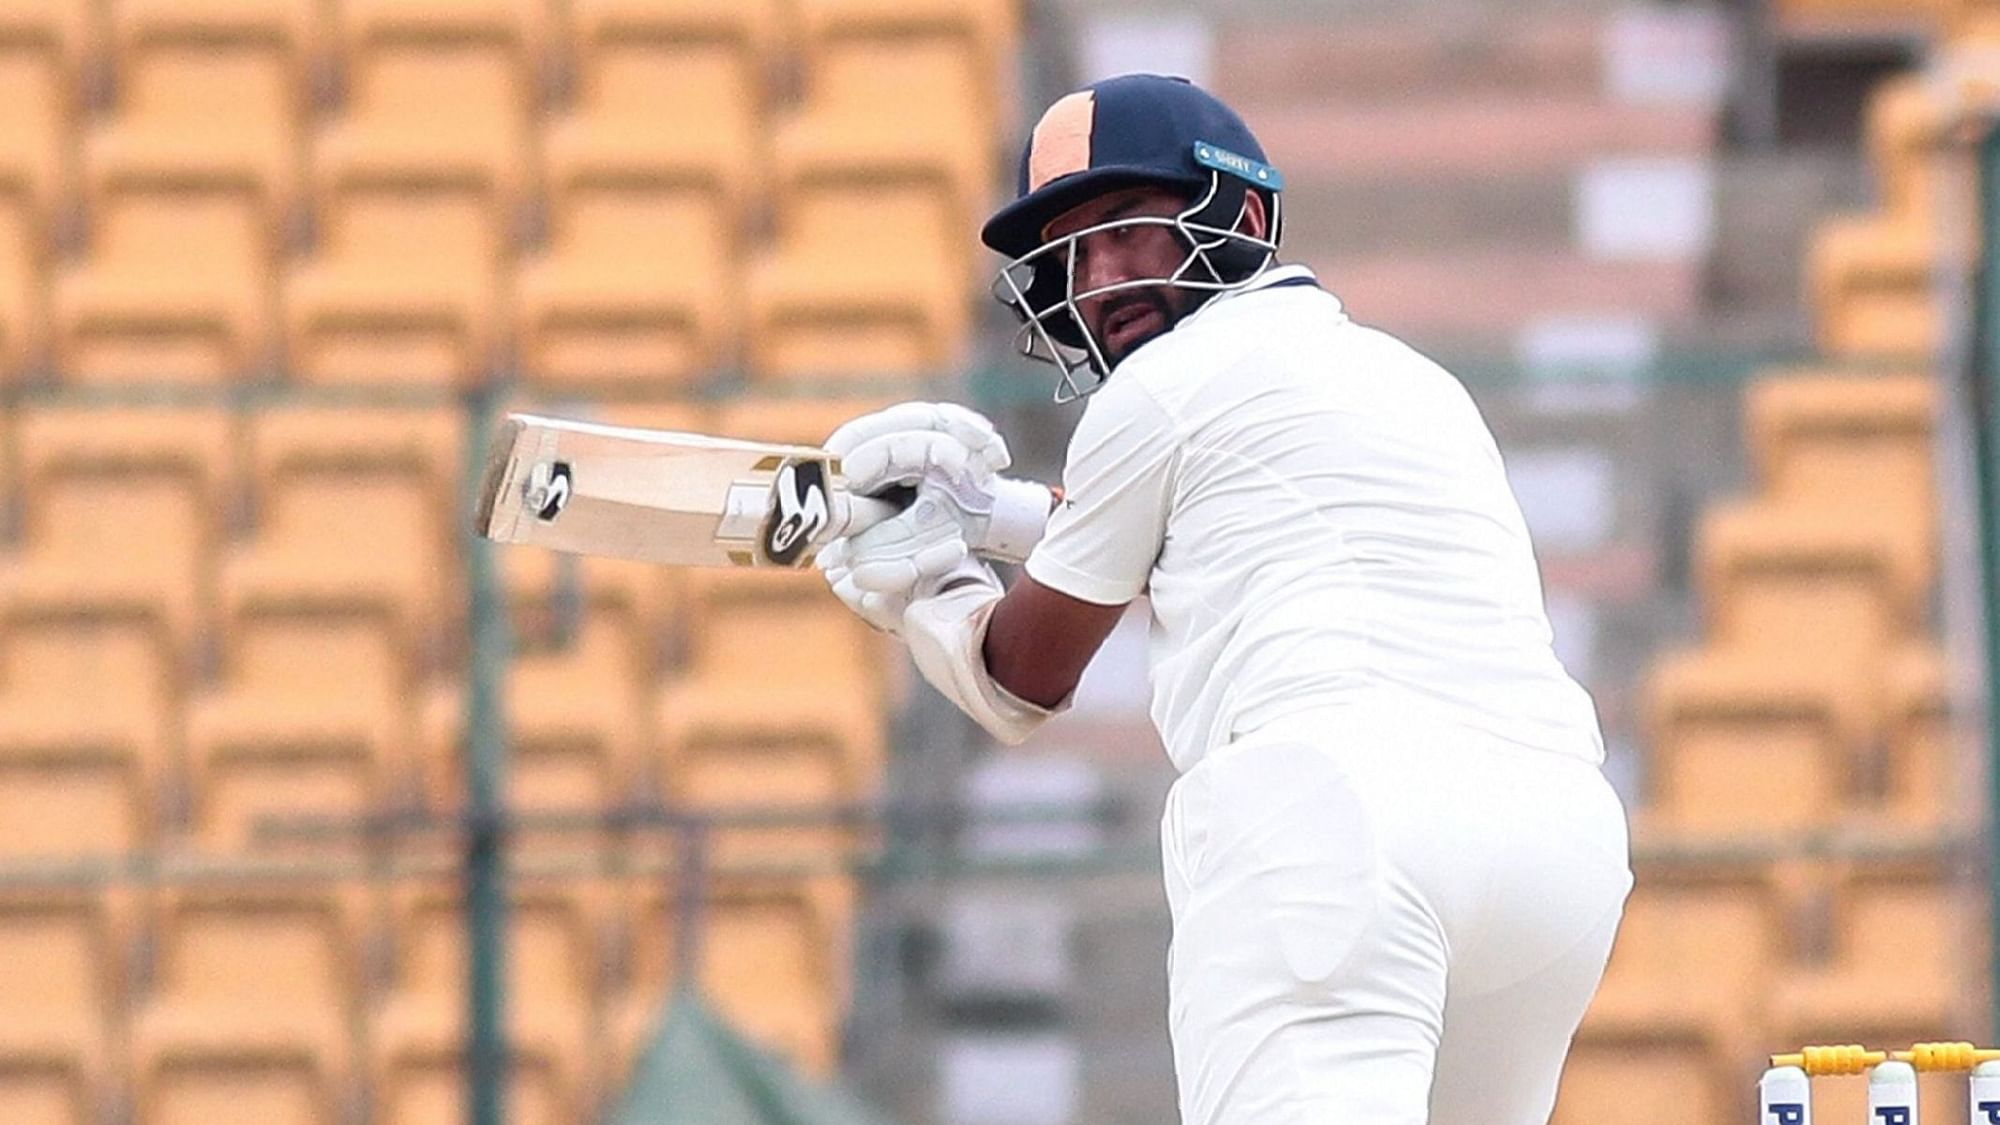 Cheteshwar Pujara’s maiden T20 century went in vain as Saurashtra lost to the Railways by 5 wickets in their Syed Mushtaq Ali Trophy opener.